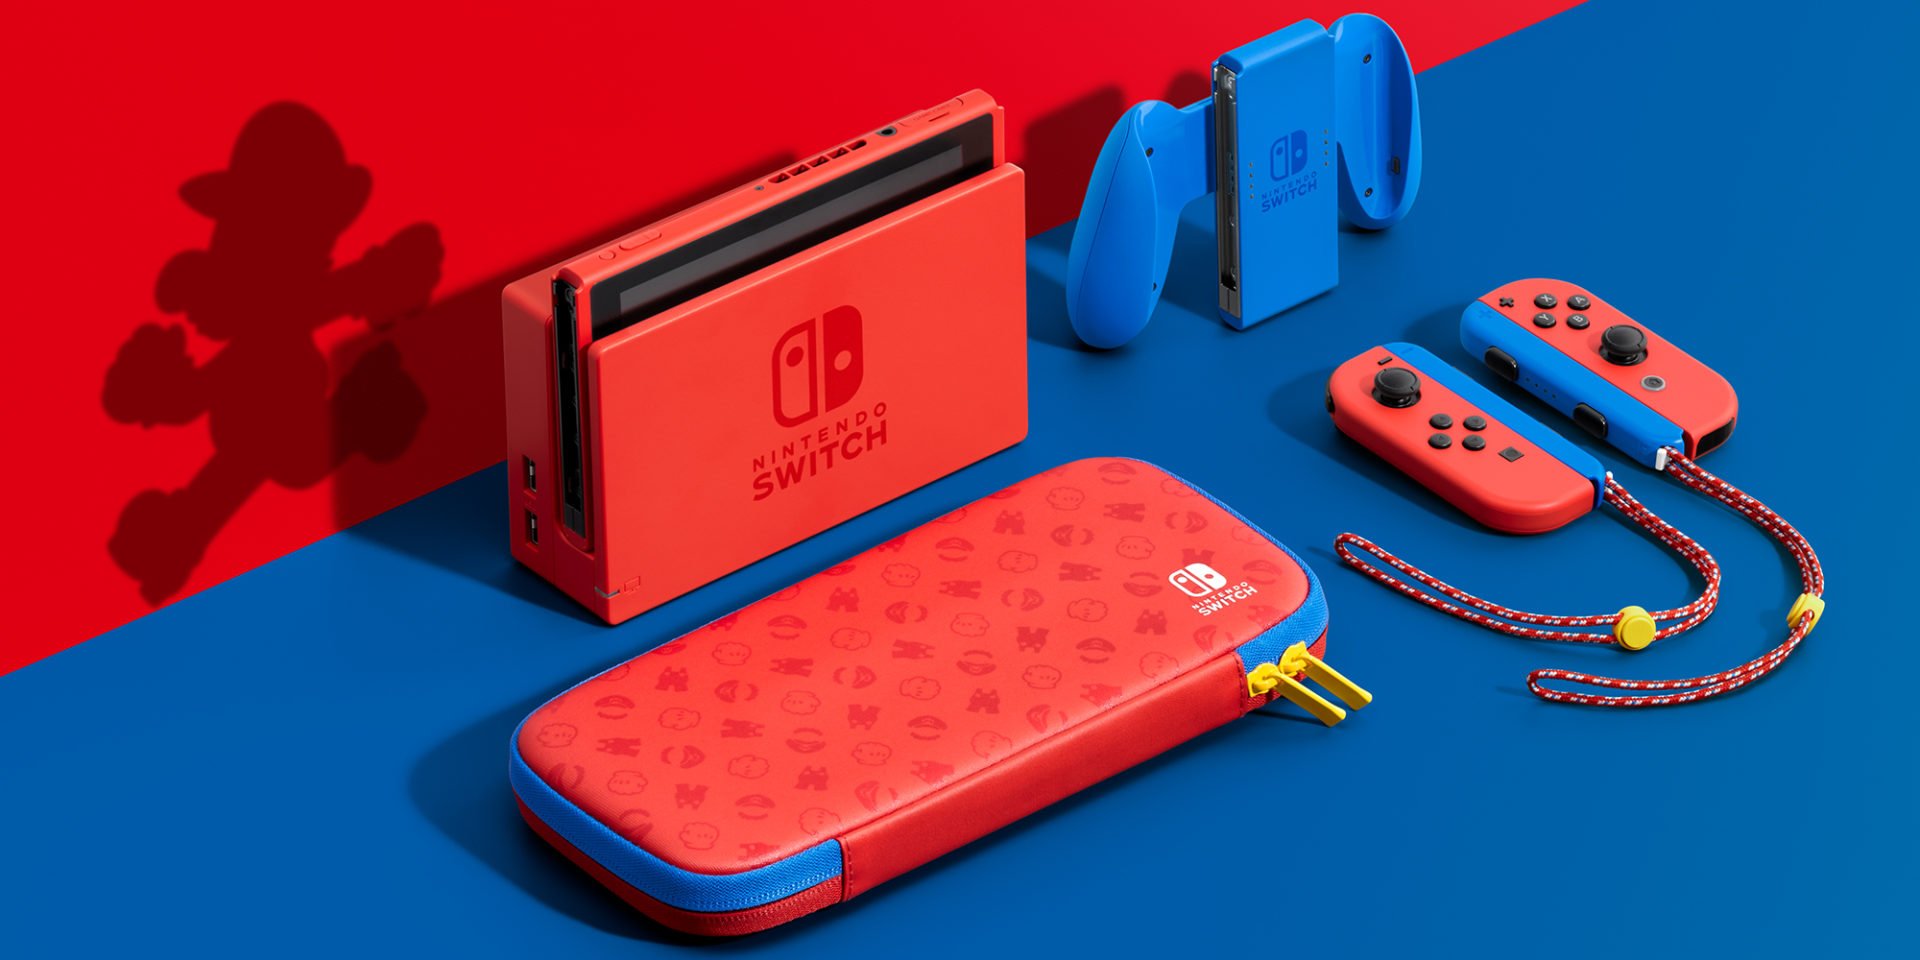 Nintendo’s new Mario edition Switch is the console’s first colour